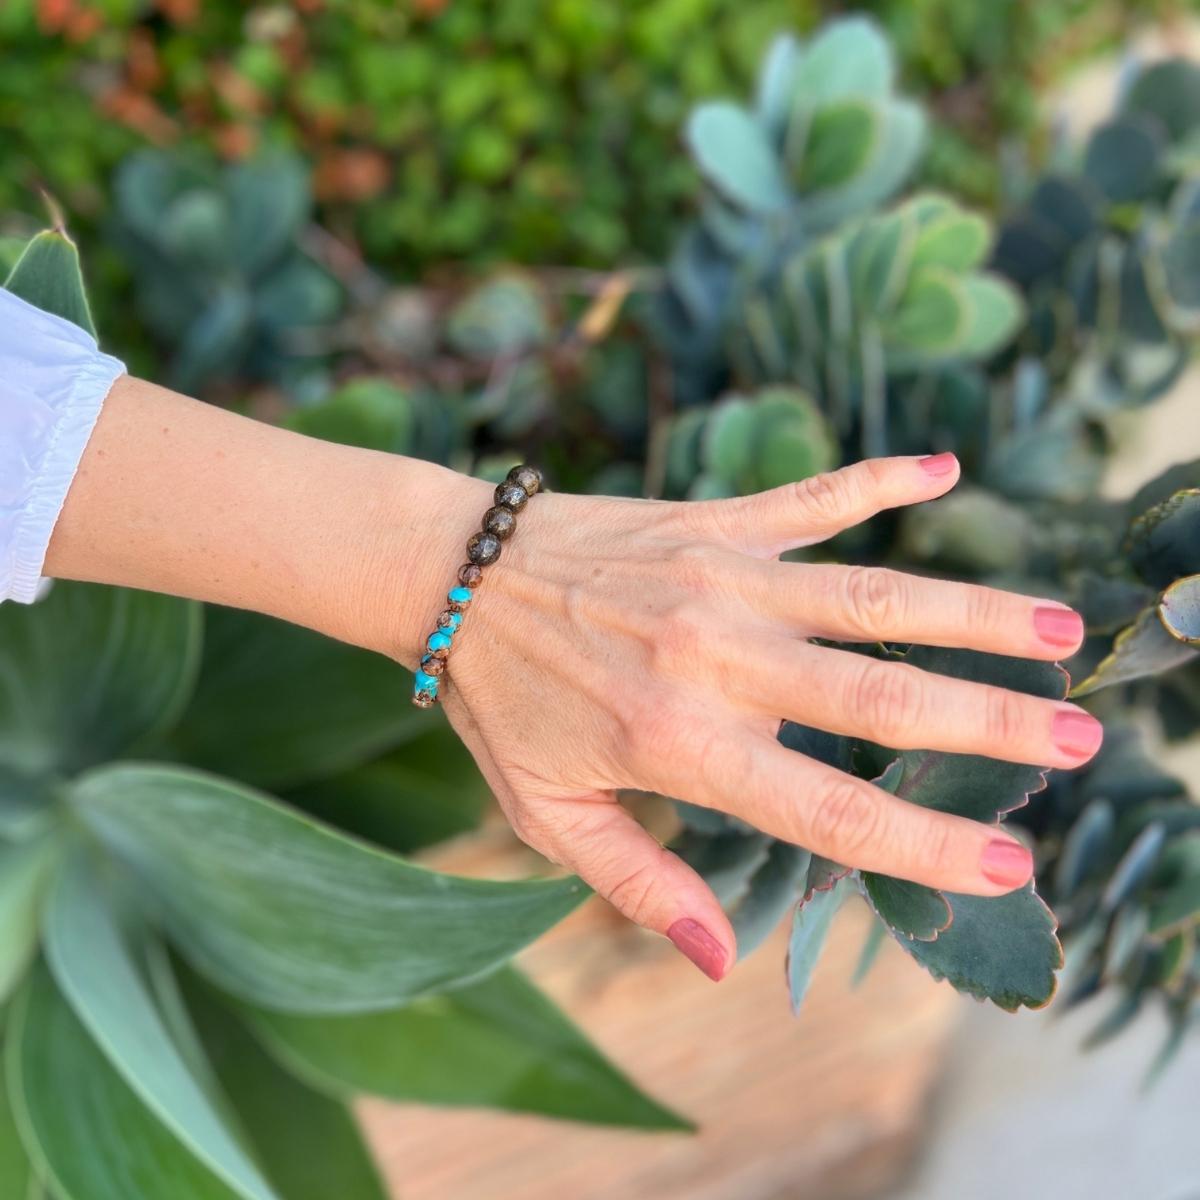  The "Peaceful Pathfinder" bracelet, a harmonious fusion of Bronzite and Turquoise, thoughtfully crafted to resonate with your inner journey.